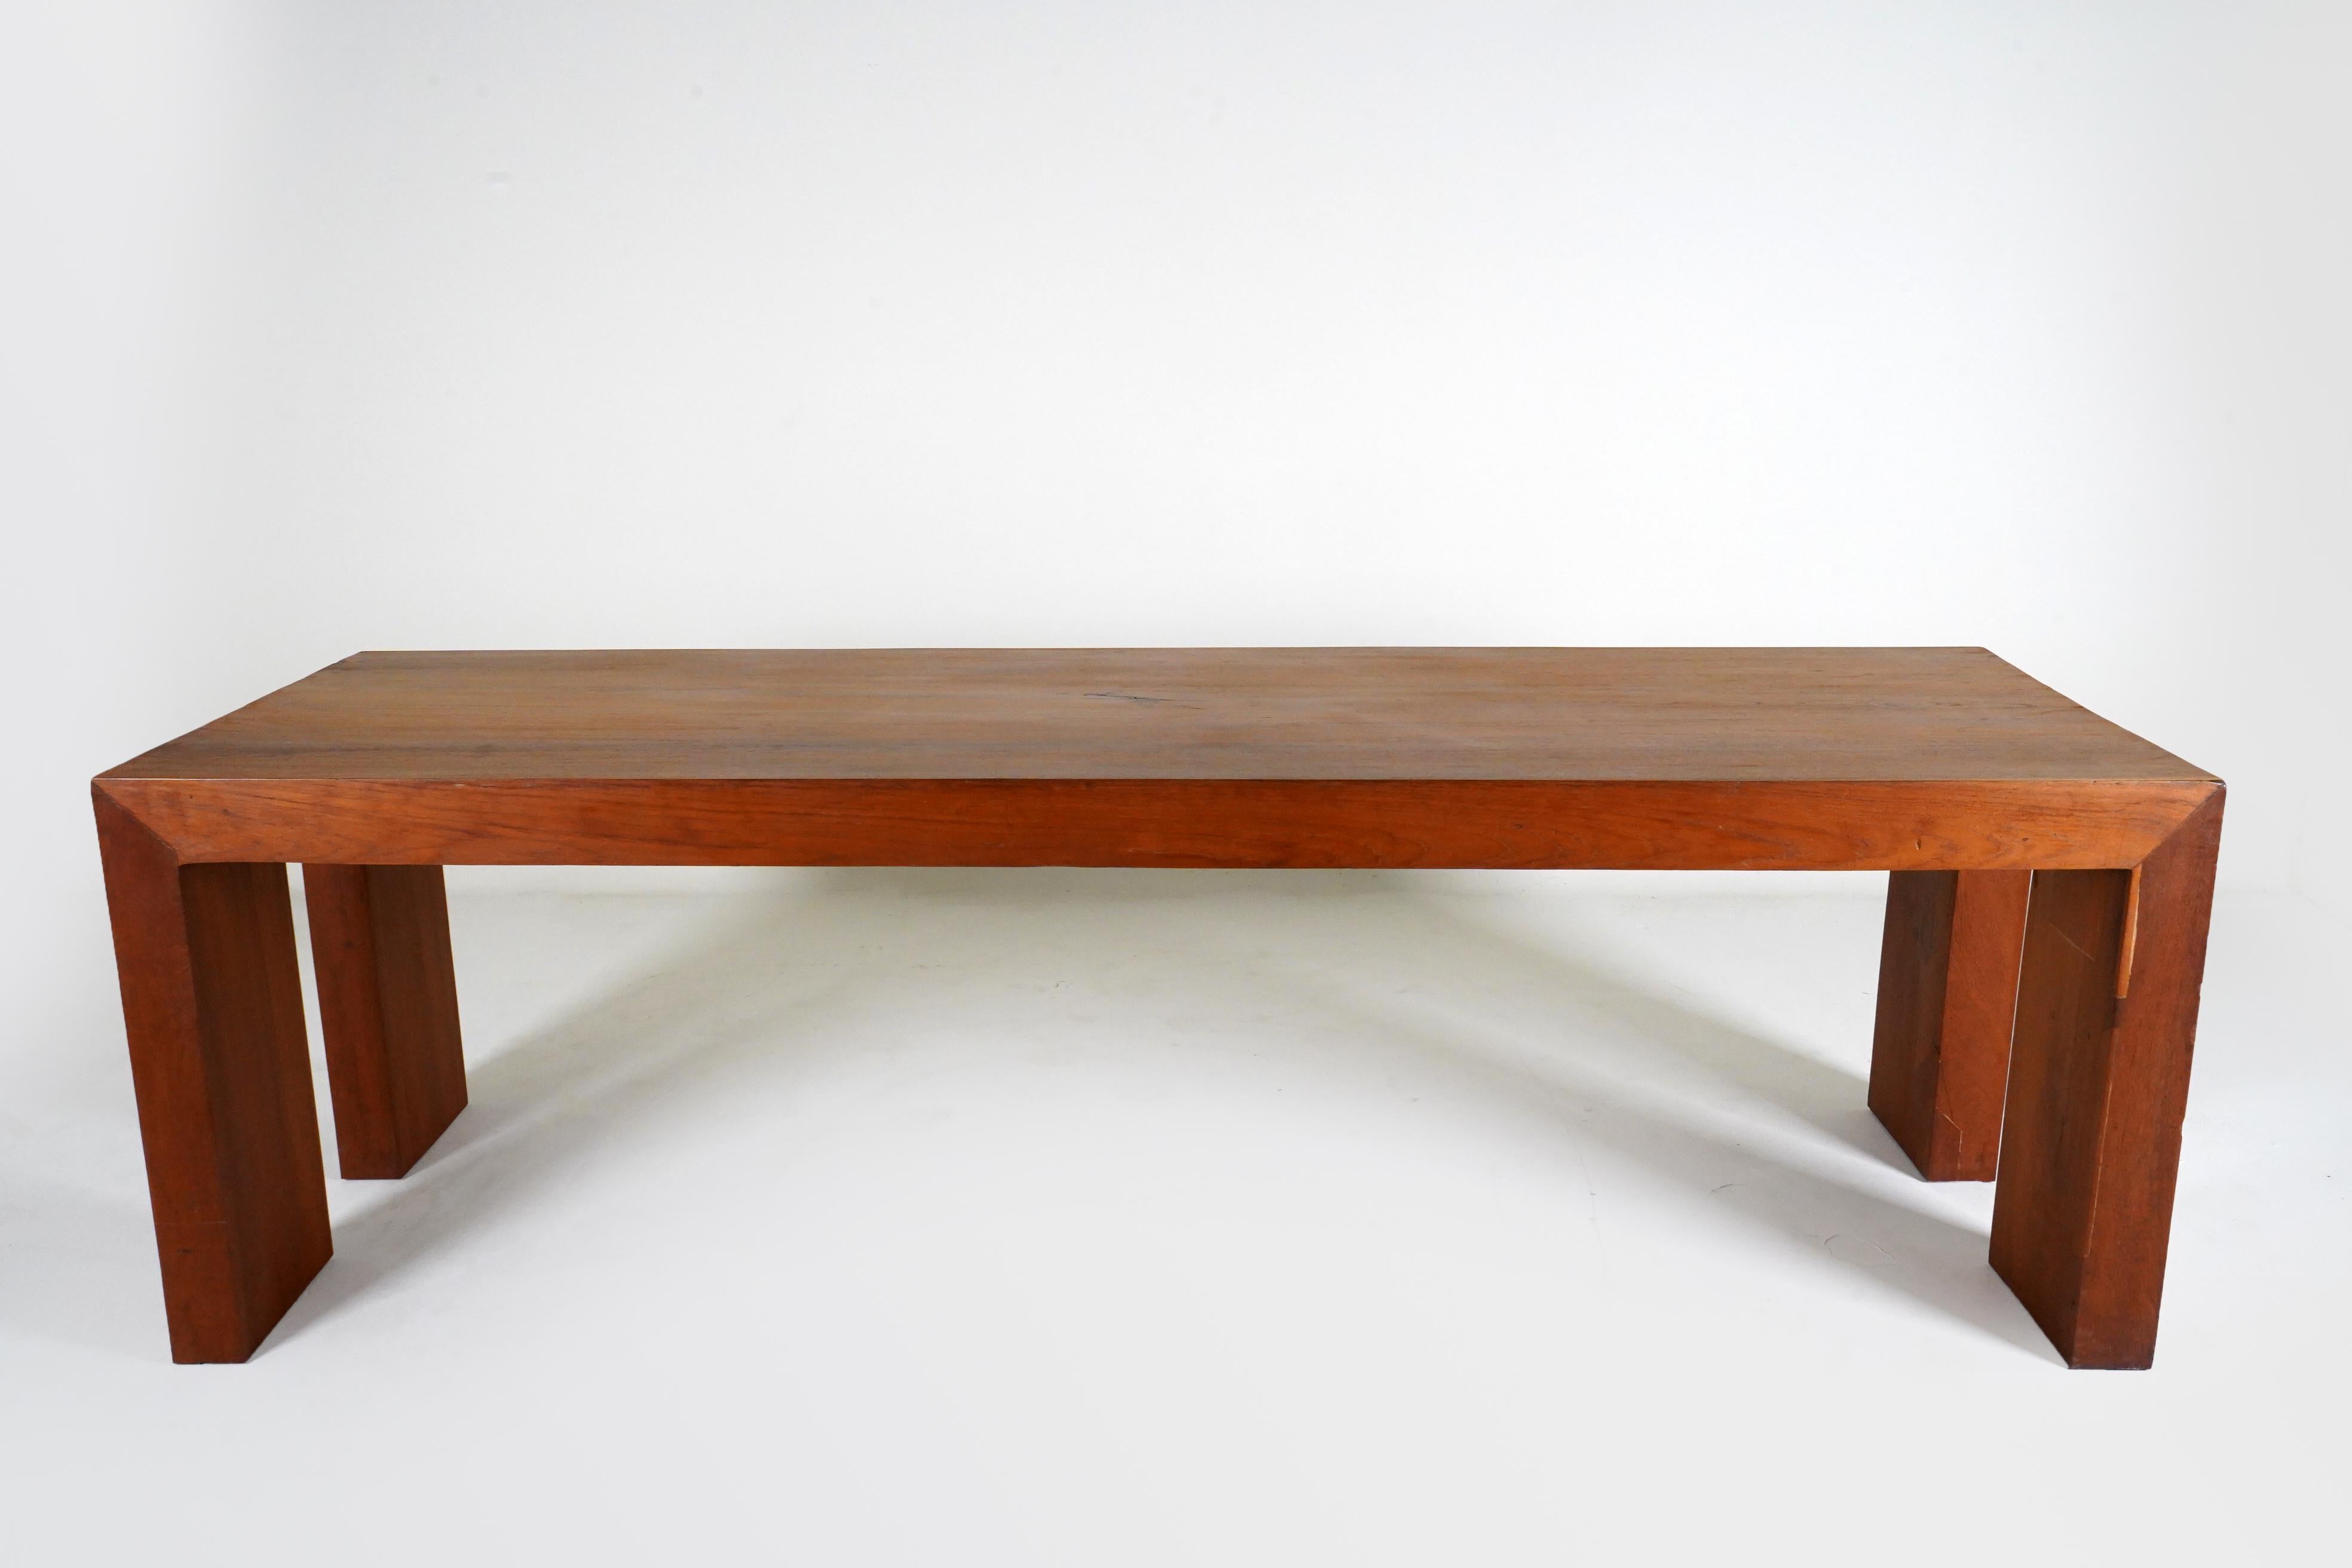 This simple and elegantly angular dining table is made from reclaimed teakwood in Chiang Mai, Thailand. The design is based on 1950's modern designs popular in Southeast Asia after WWII.